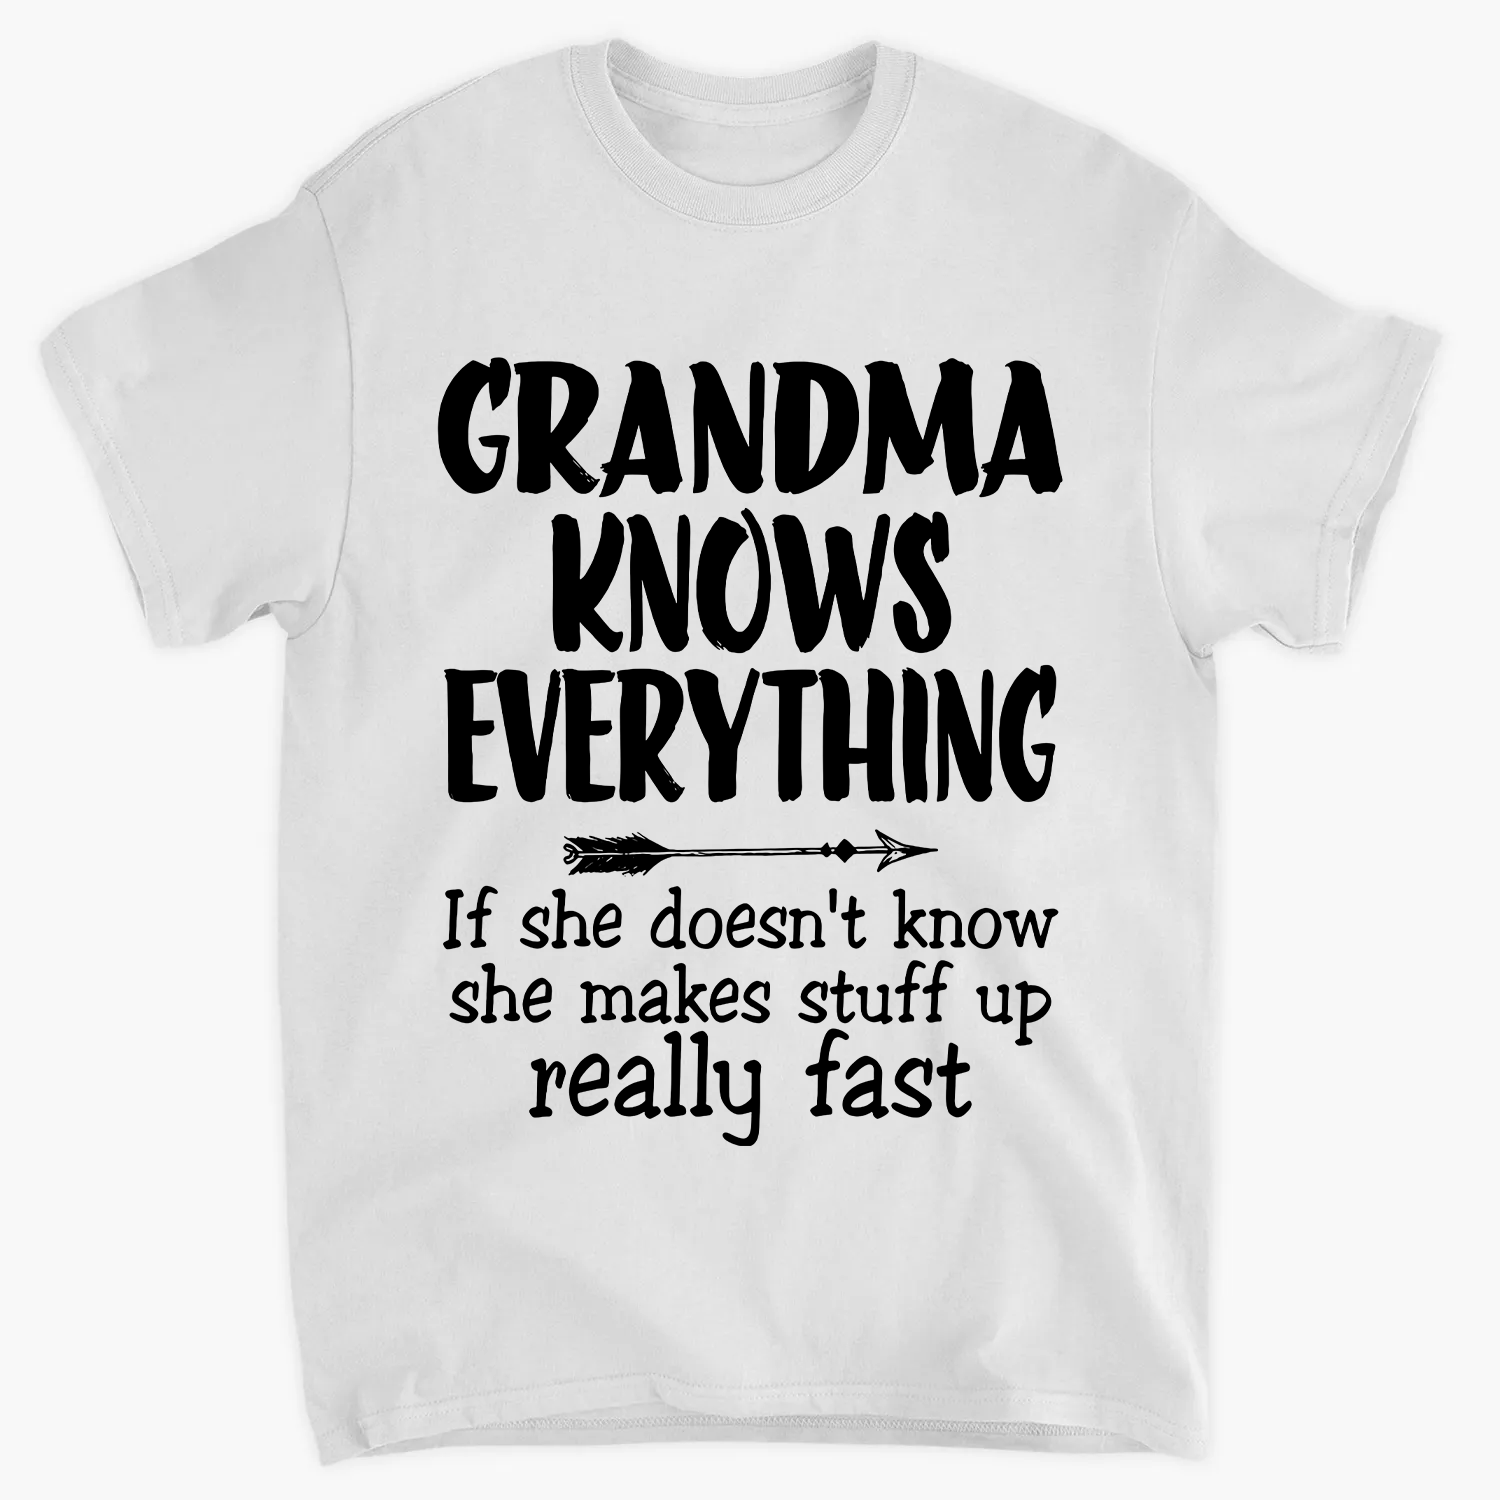 Grandma Knows Everything If She Doesn't Know She Makes Stuff Up Really Fast - T-shirt - Mother's Day Gift For Grandmother, Grandma, Grandkid ARND0014